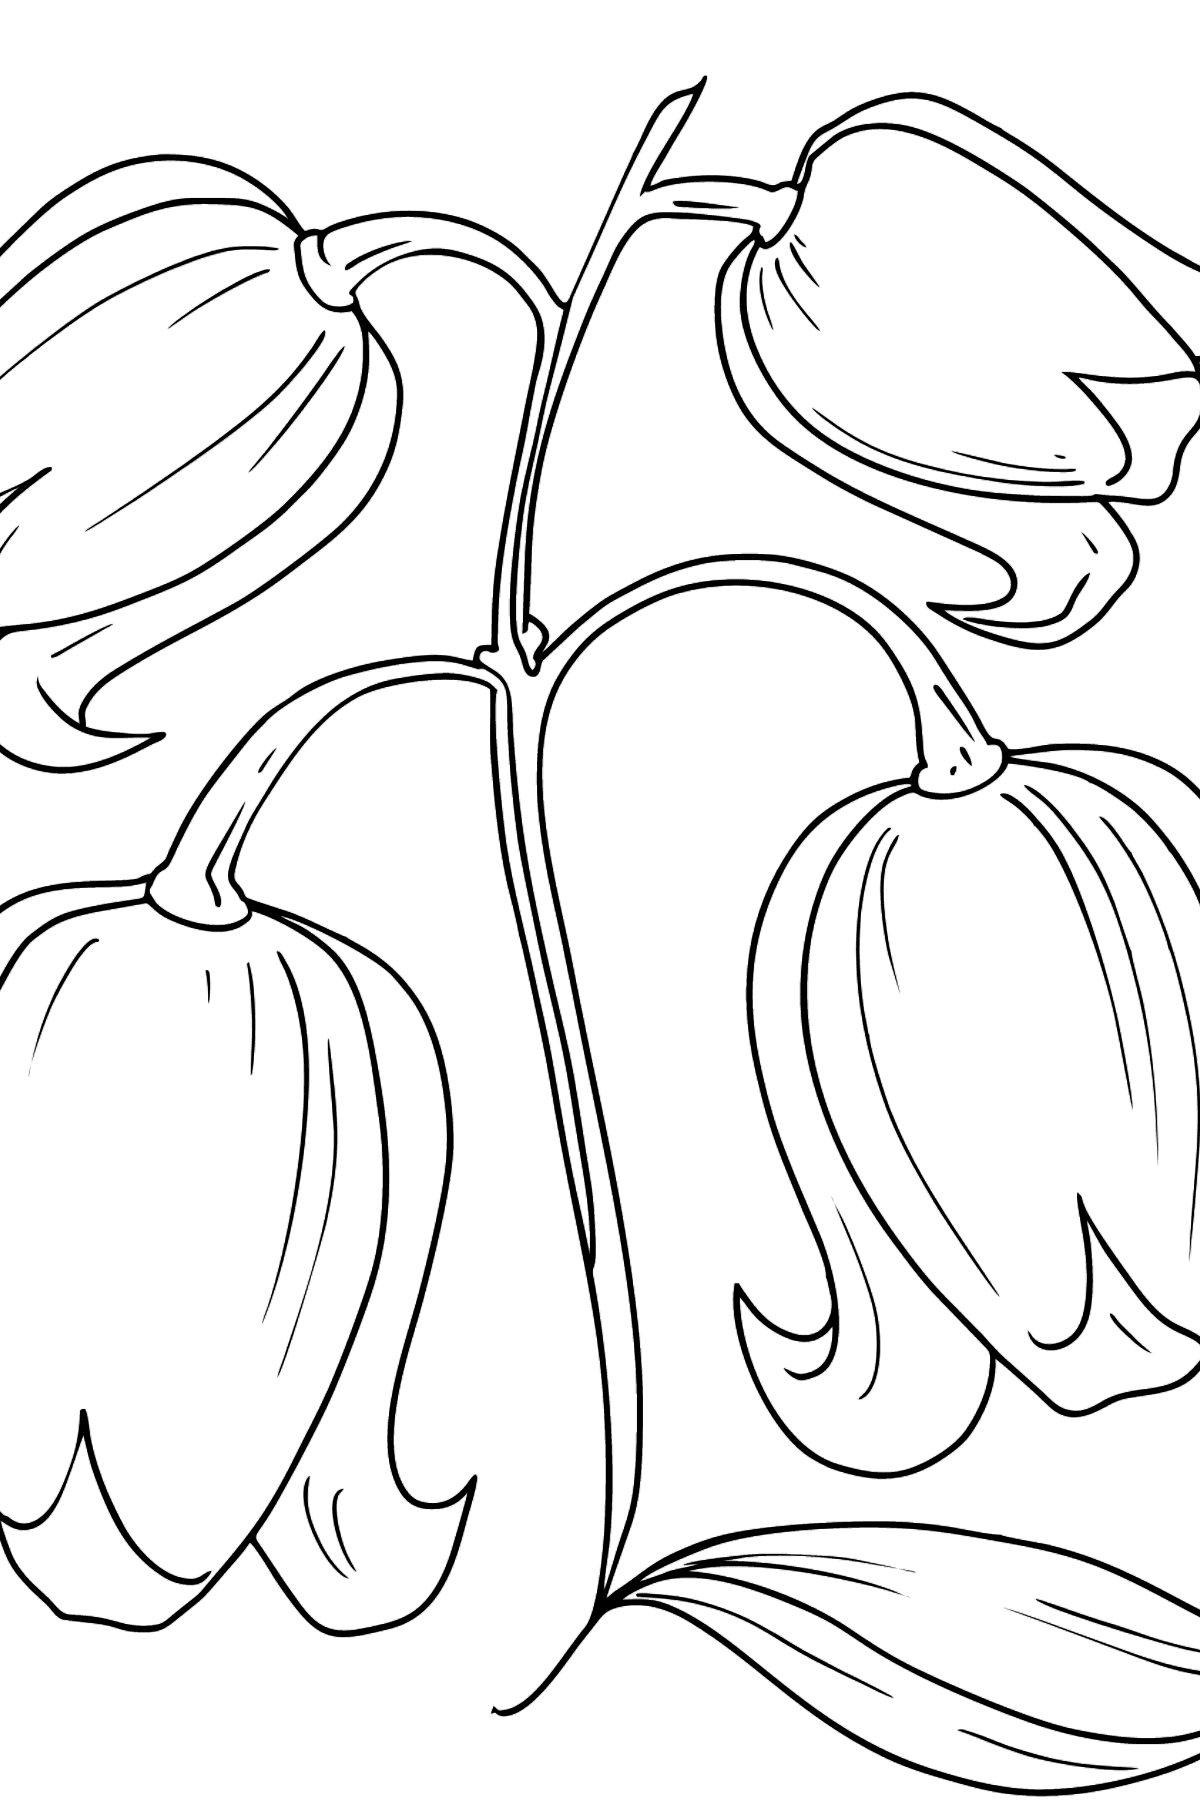 Flower Coloring Page - Beautiful bells - Coloring Pages for Kids